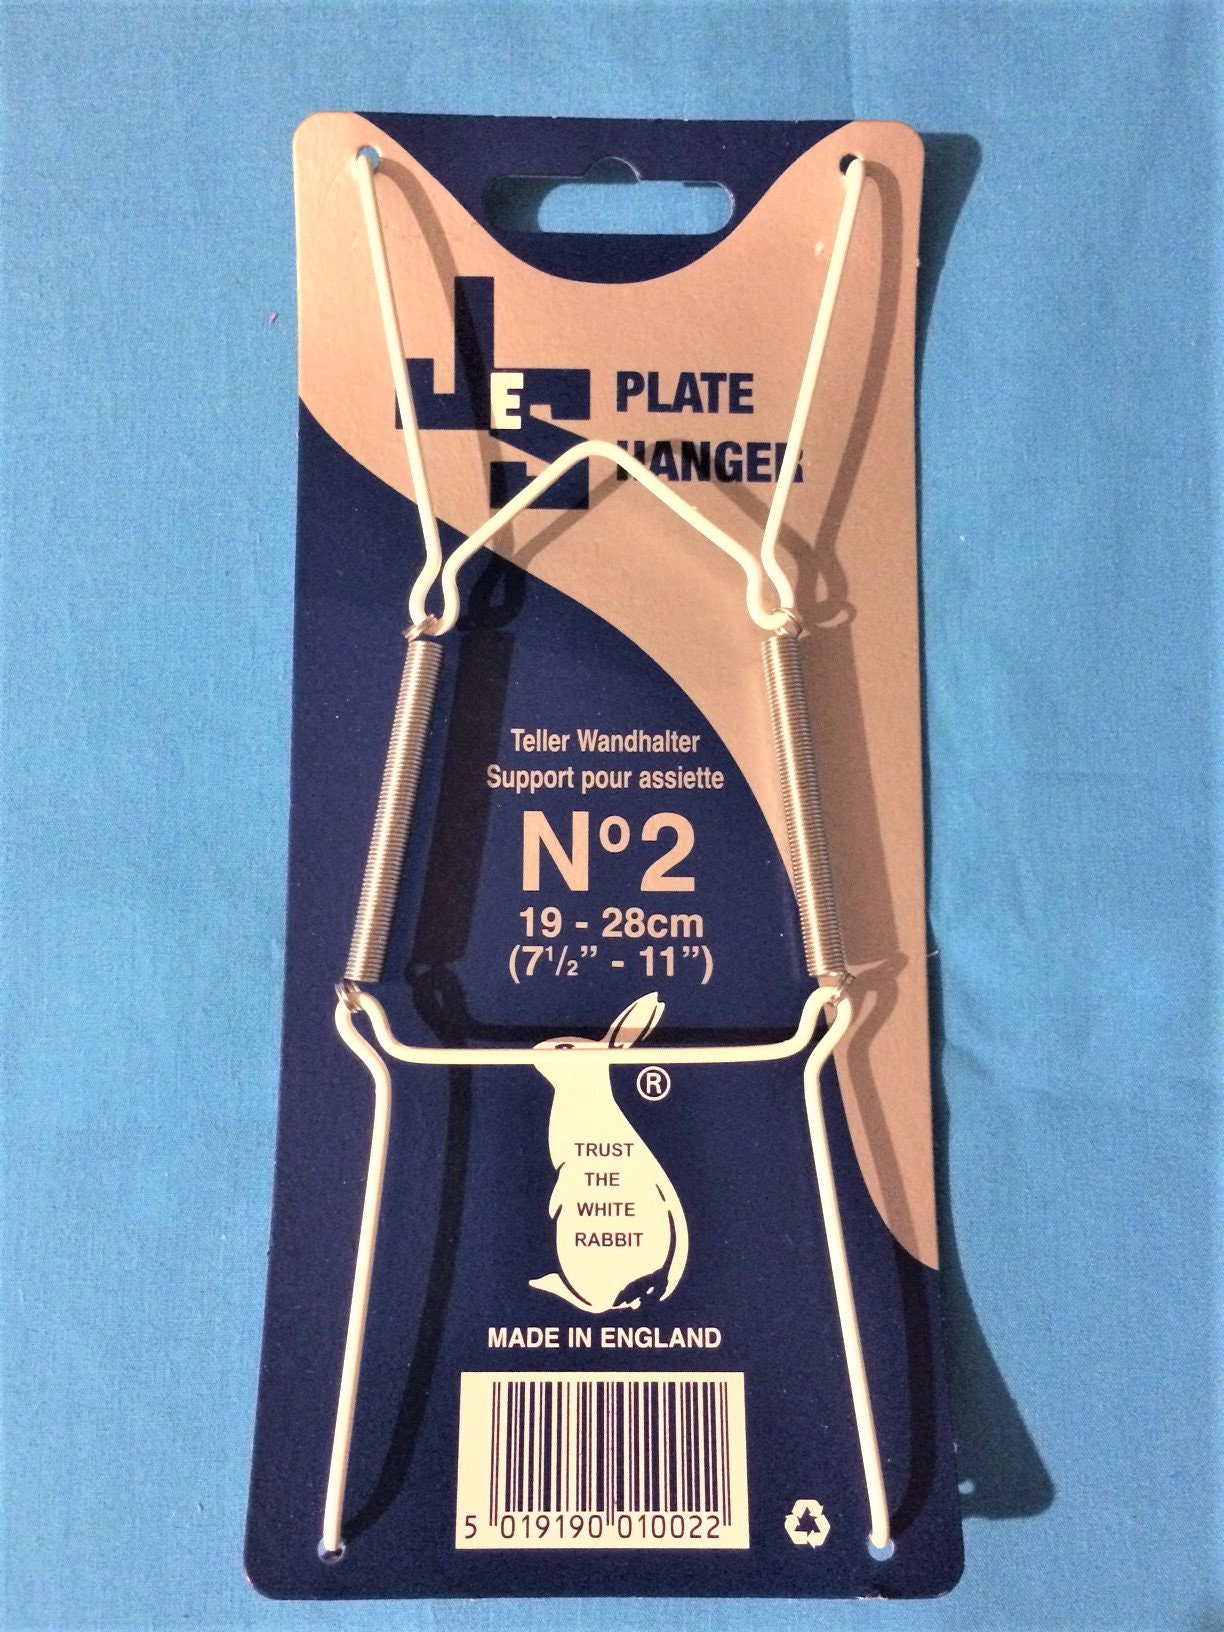 Wire Plate Hangers sizes No-2 19-28CM 7.5"-11" Wall Holder 